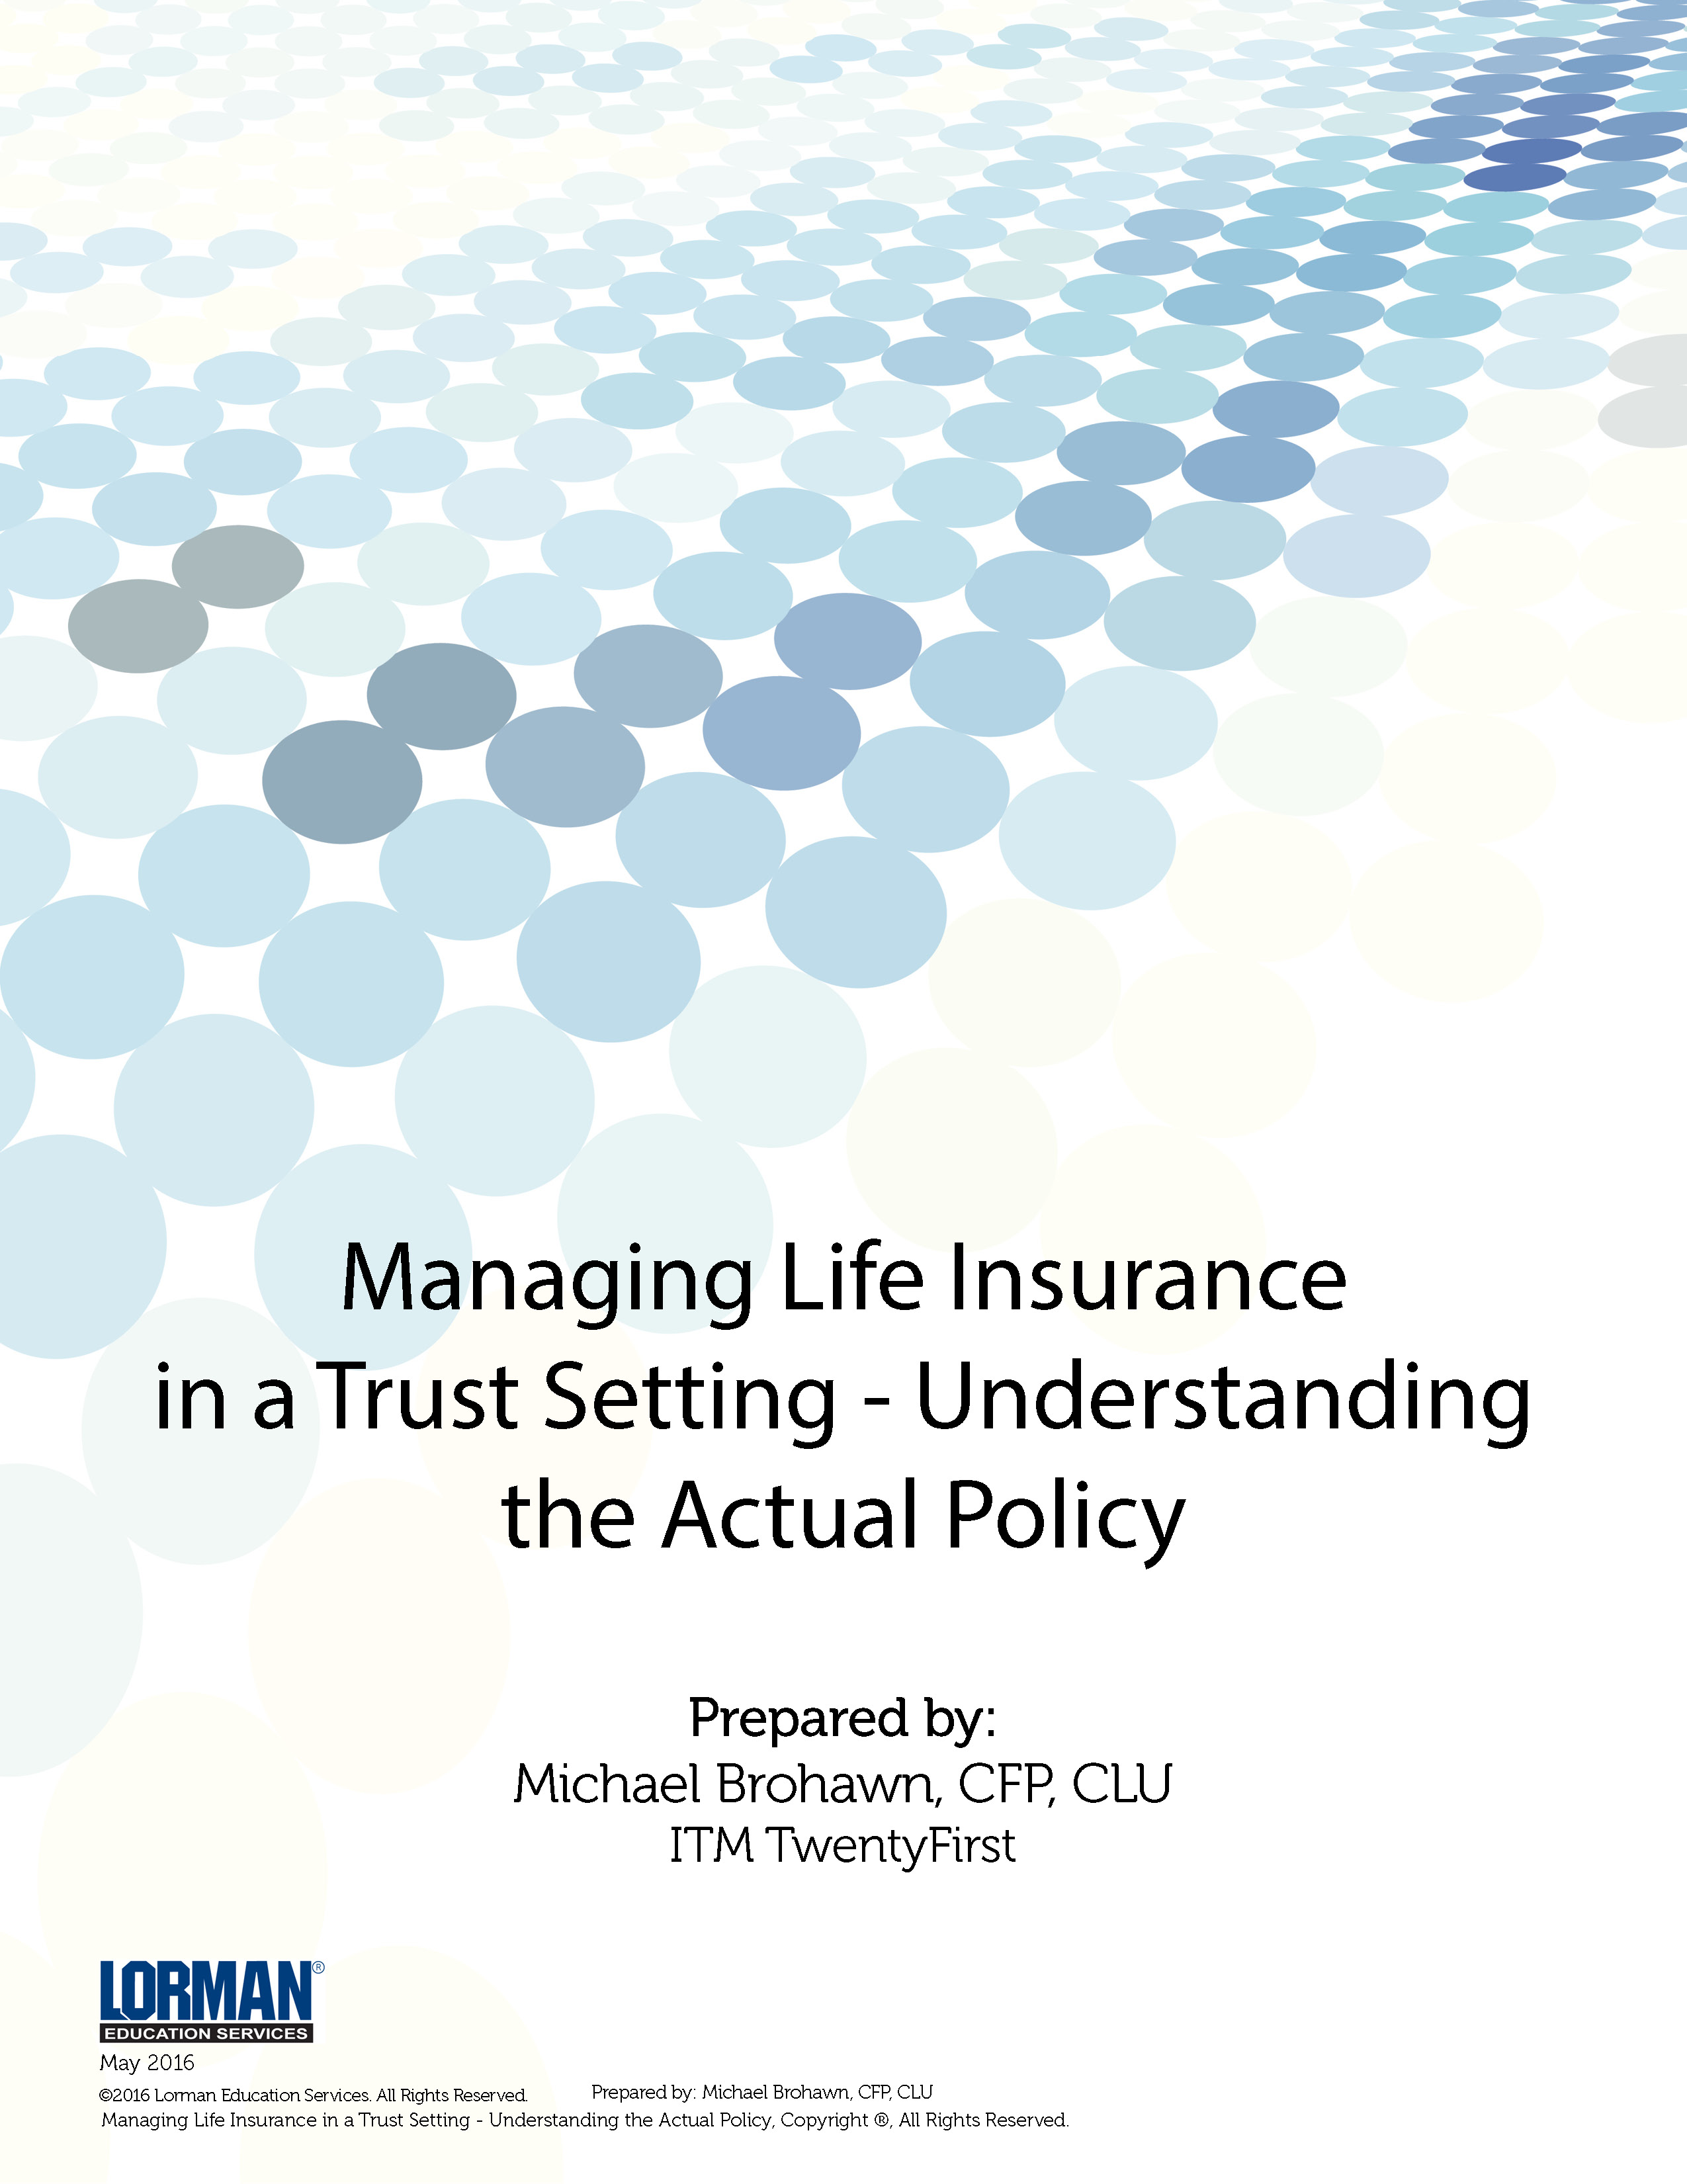 Managing Life Insurance in a Trust Setting - Understanding the Actual Policy